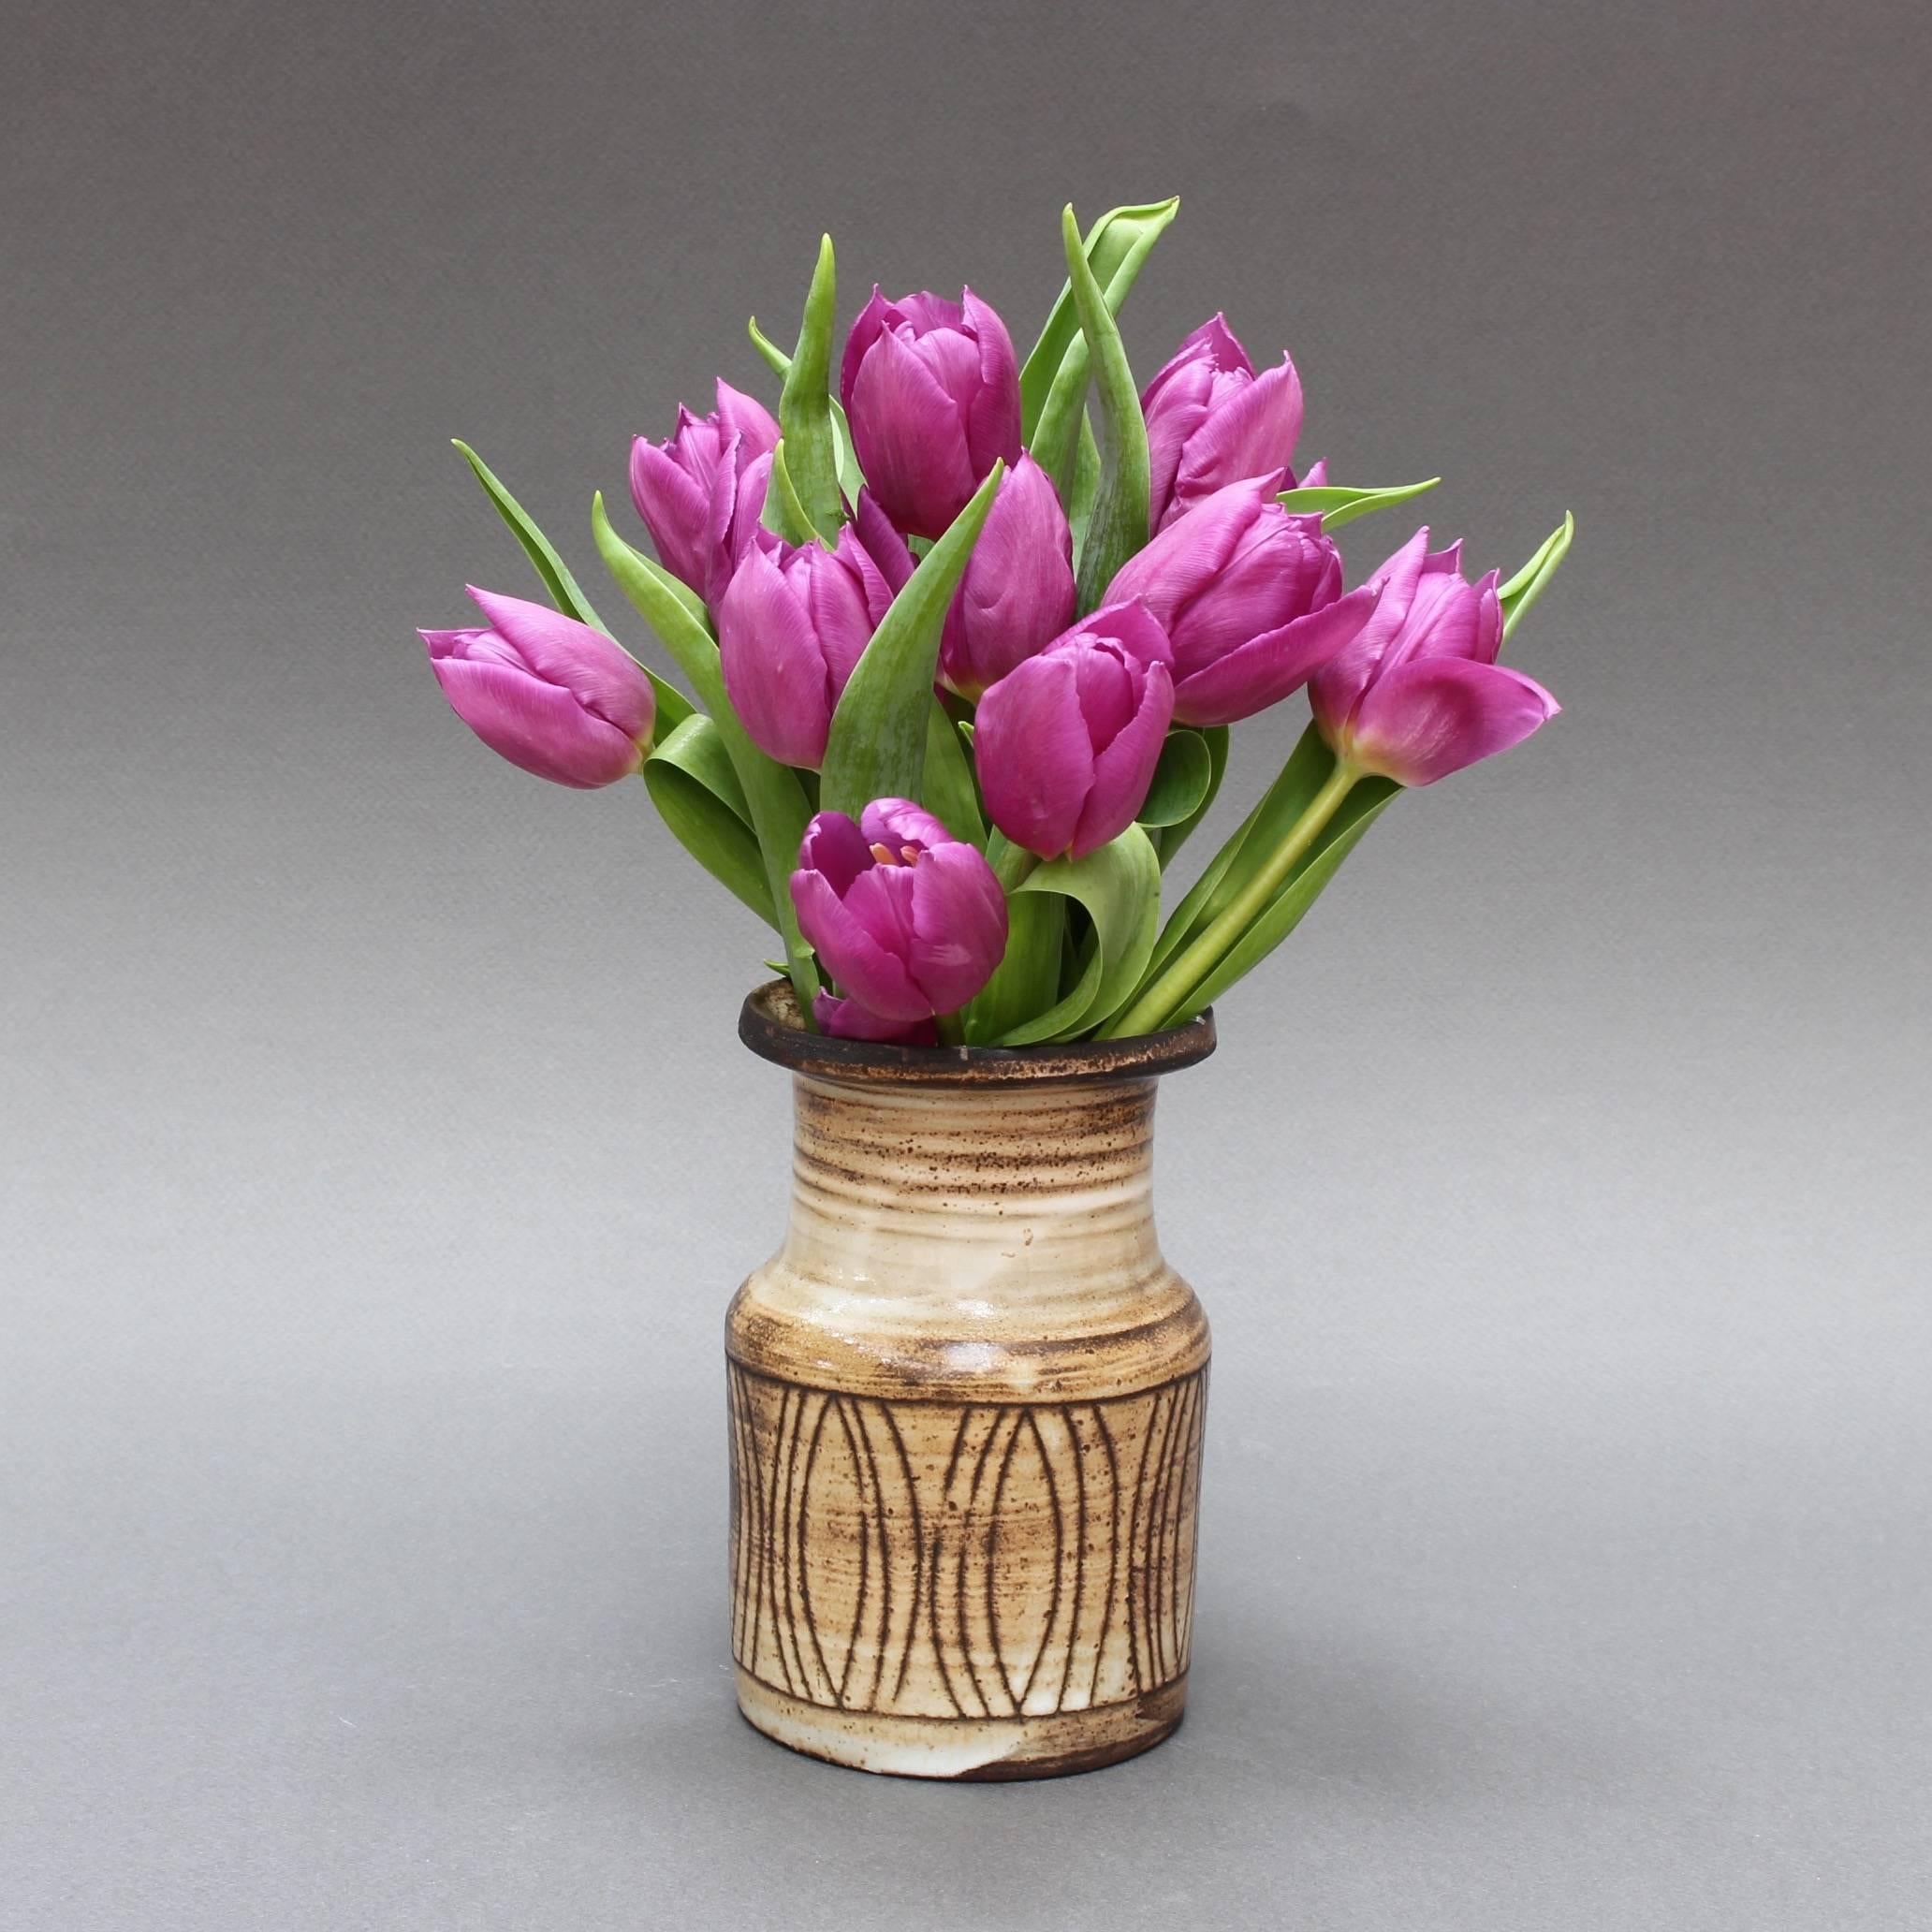 This petite midcentury ceramic vase (circa 1960s) is done in Pouchain's trademark style with muted brown horizontal lines above a frieze with oval motif over a beige and darker glaze. The hallmark etching appears on the vase bottom, 'Atelier